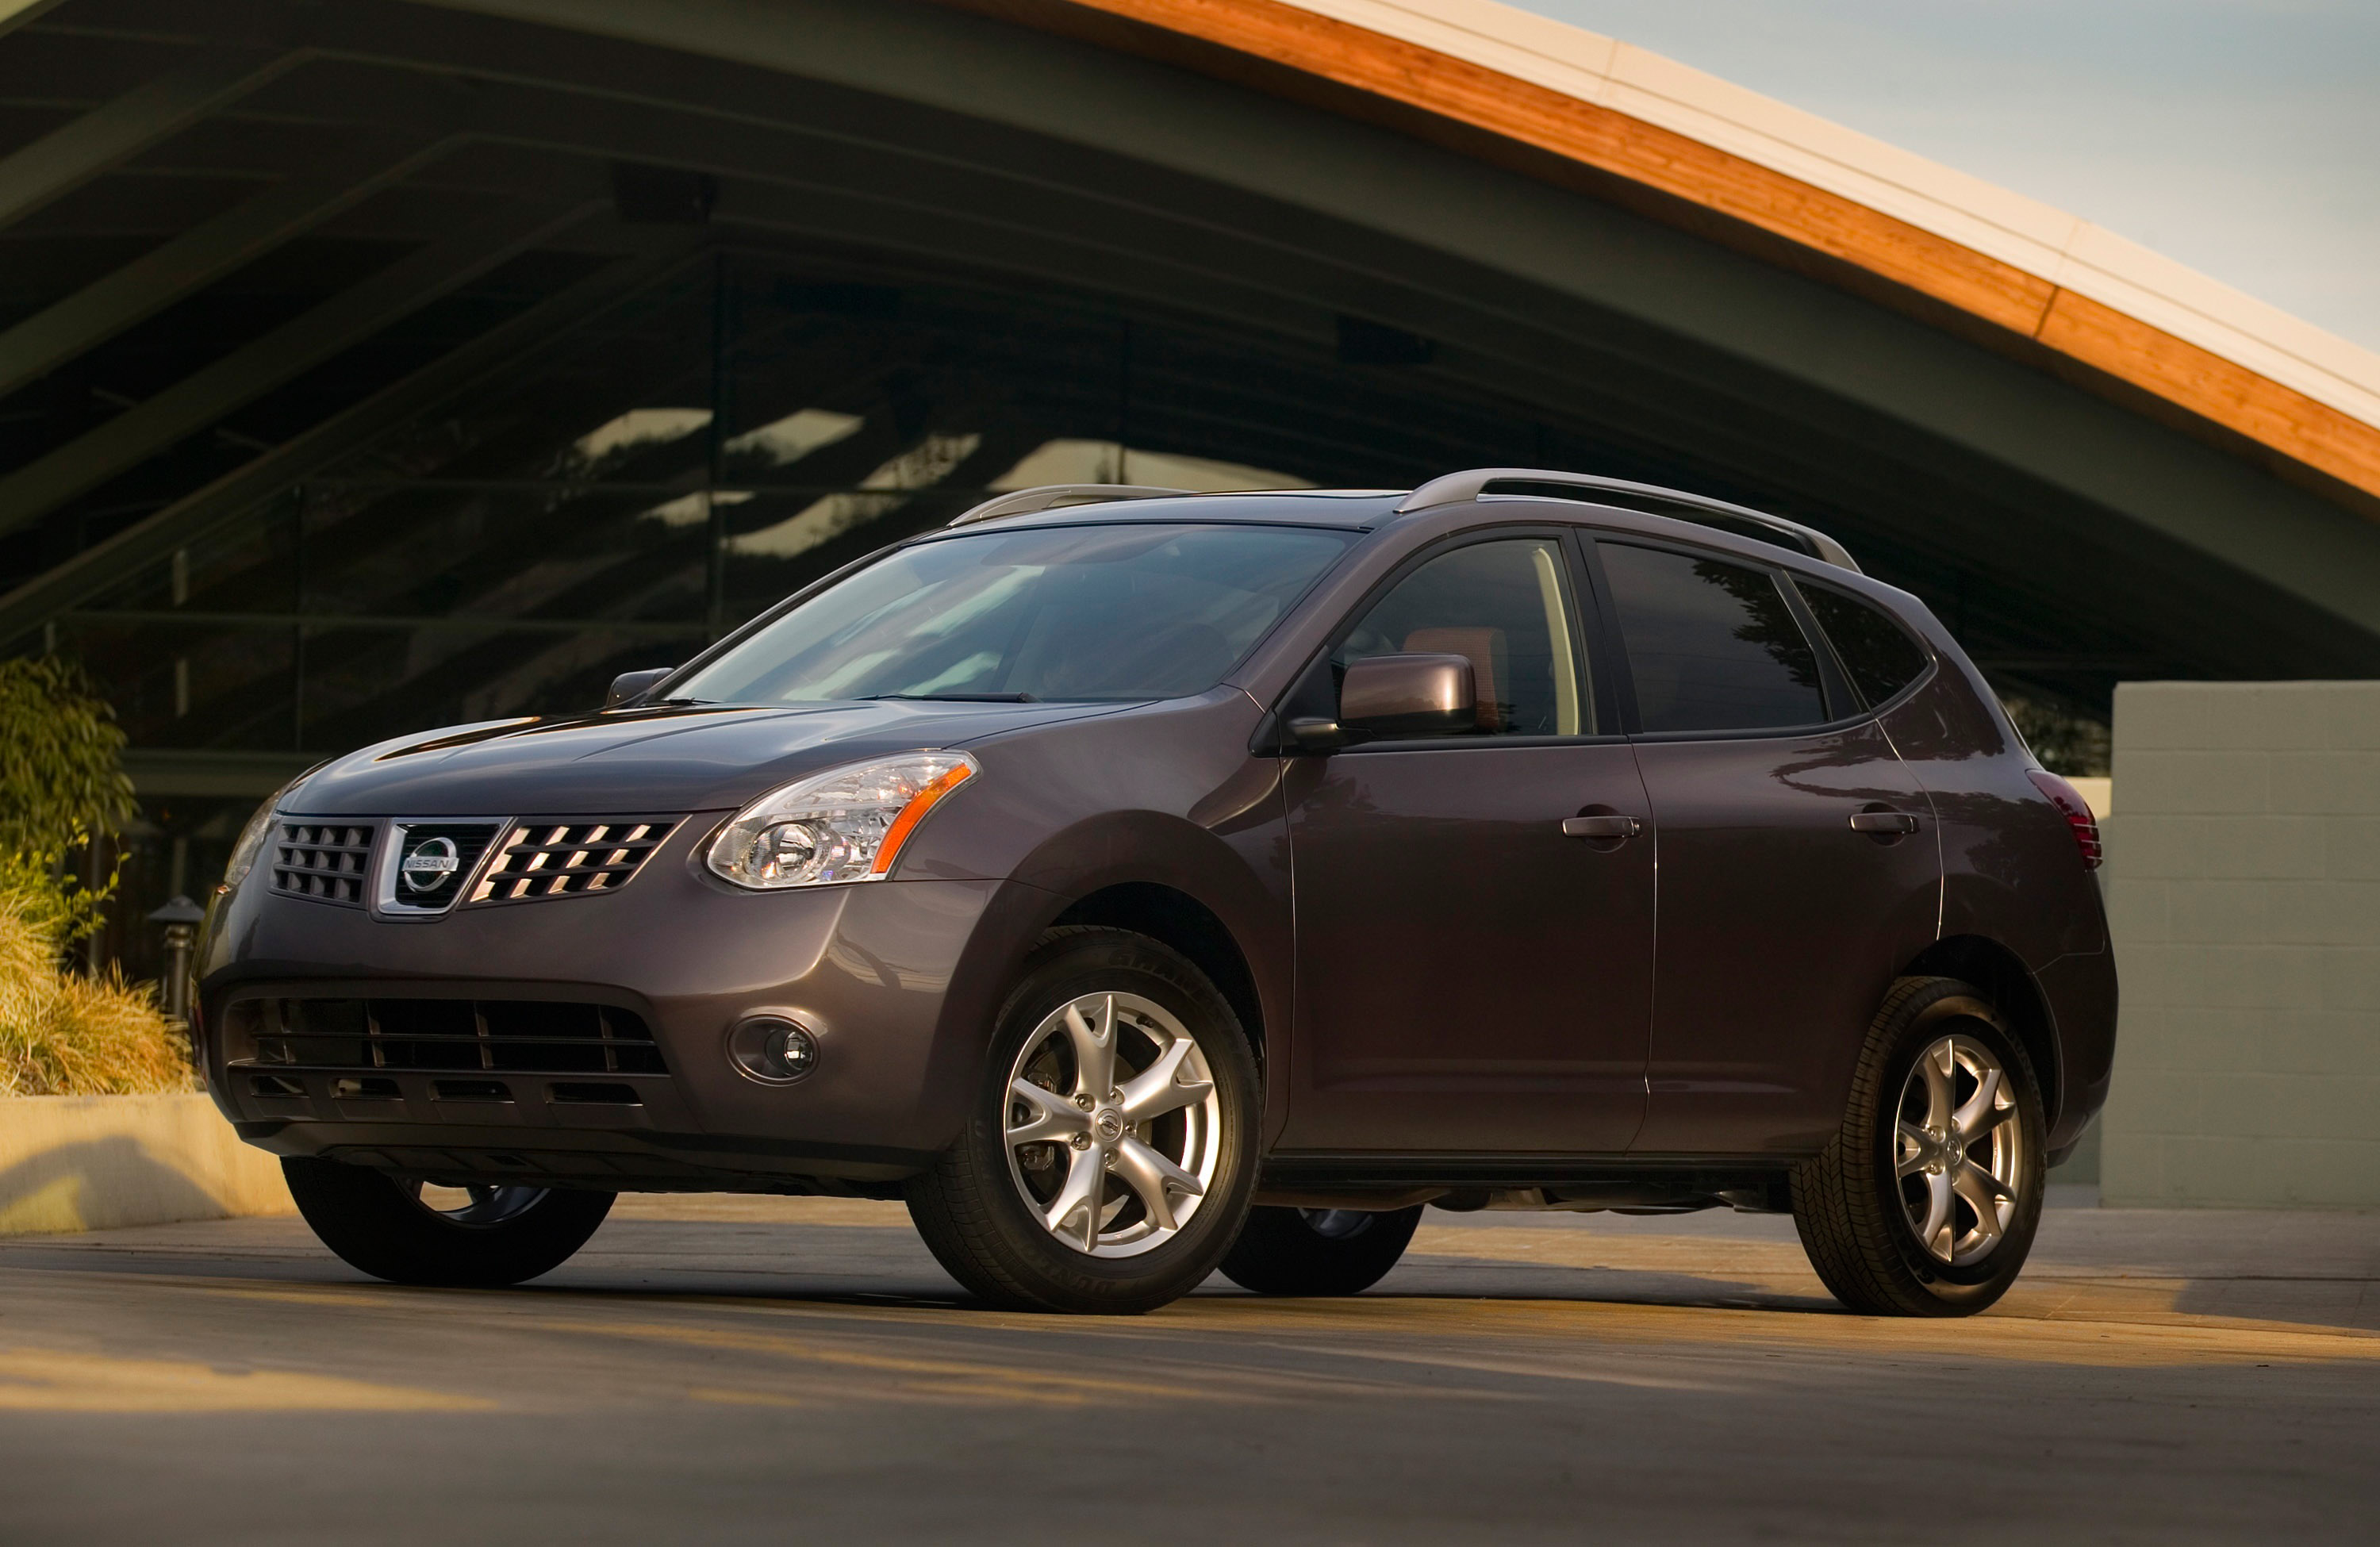 2010 Nissan Rogue Pricing Announced